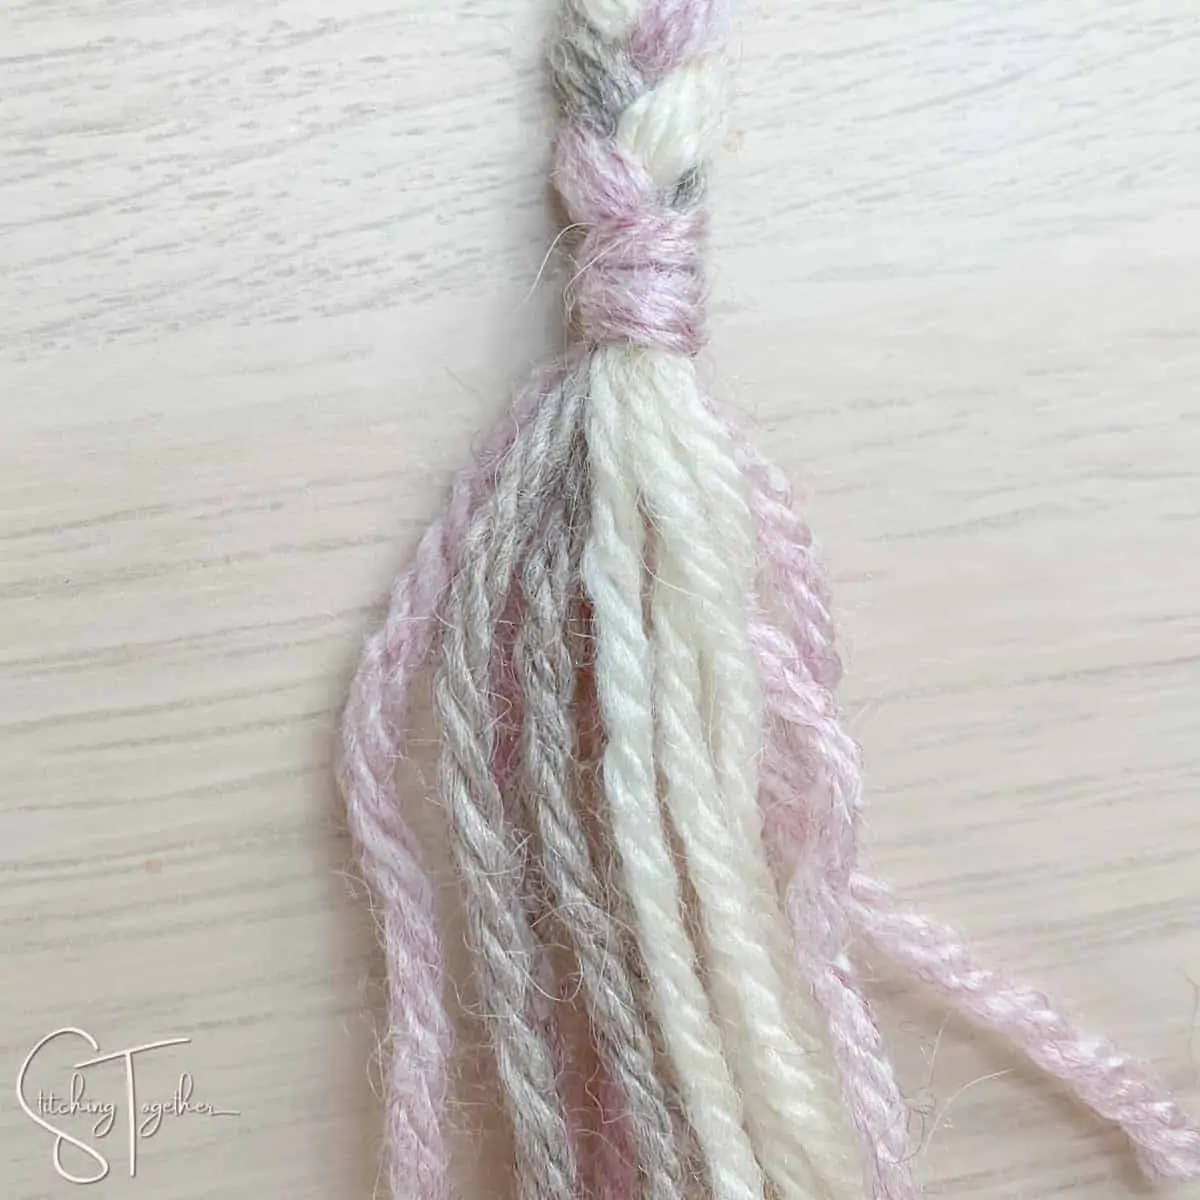 securing the braid with yarn